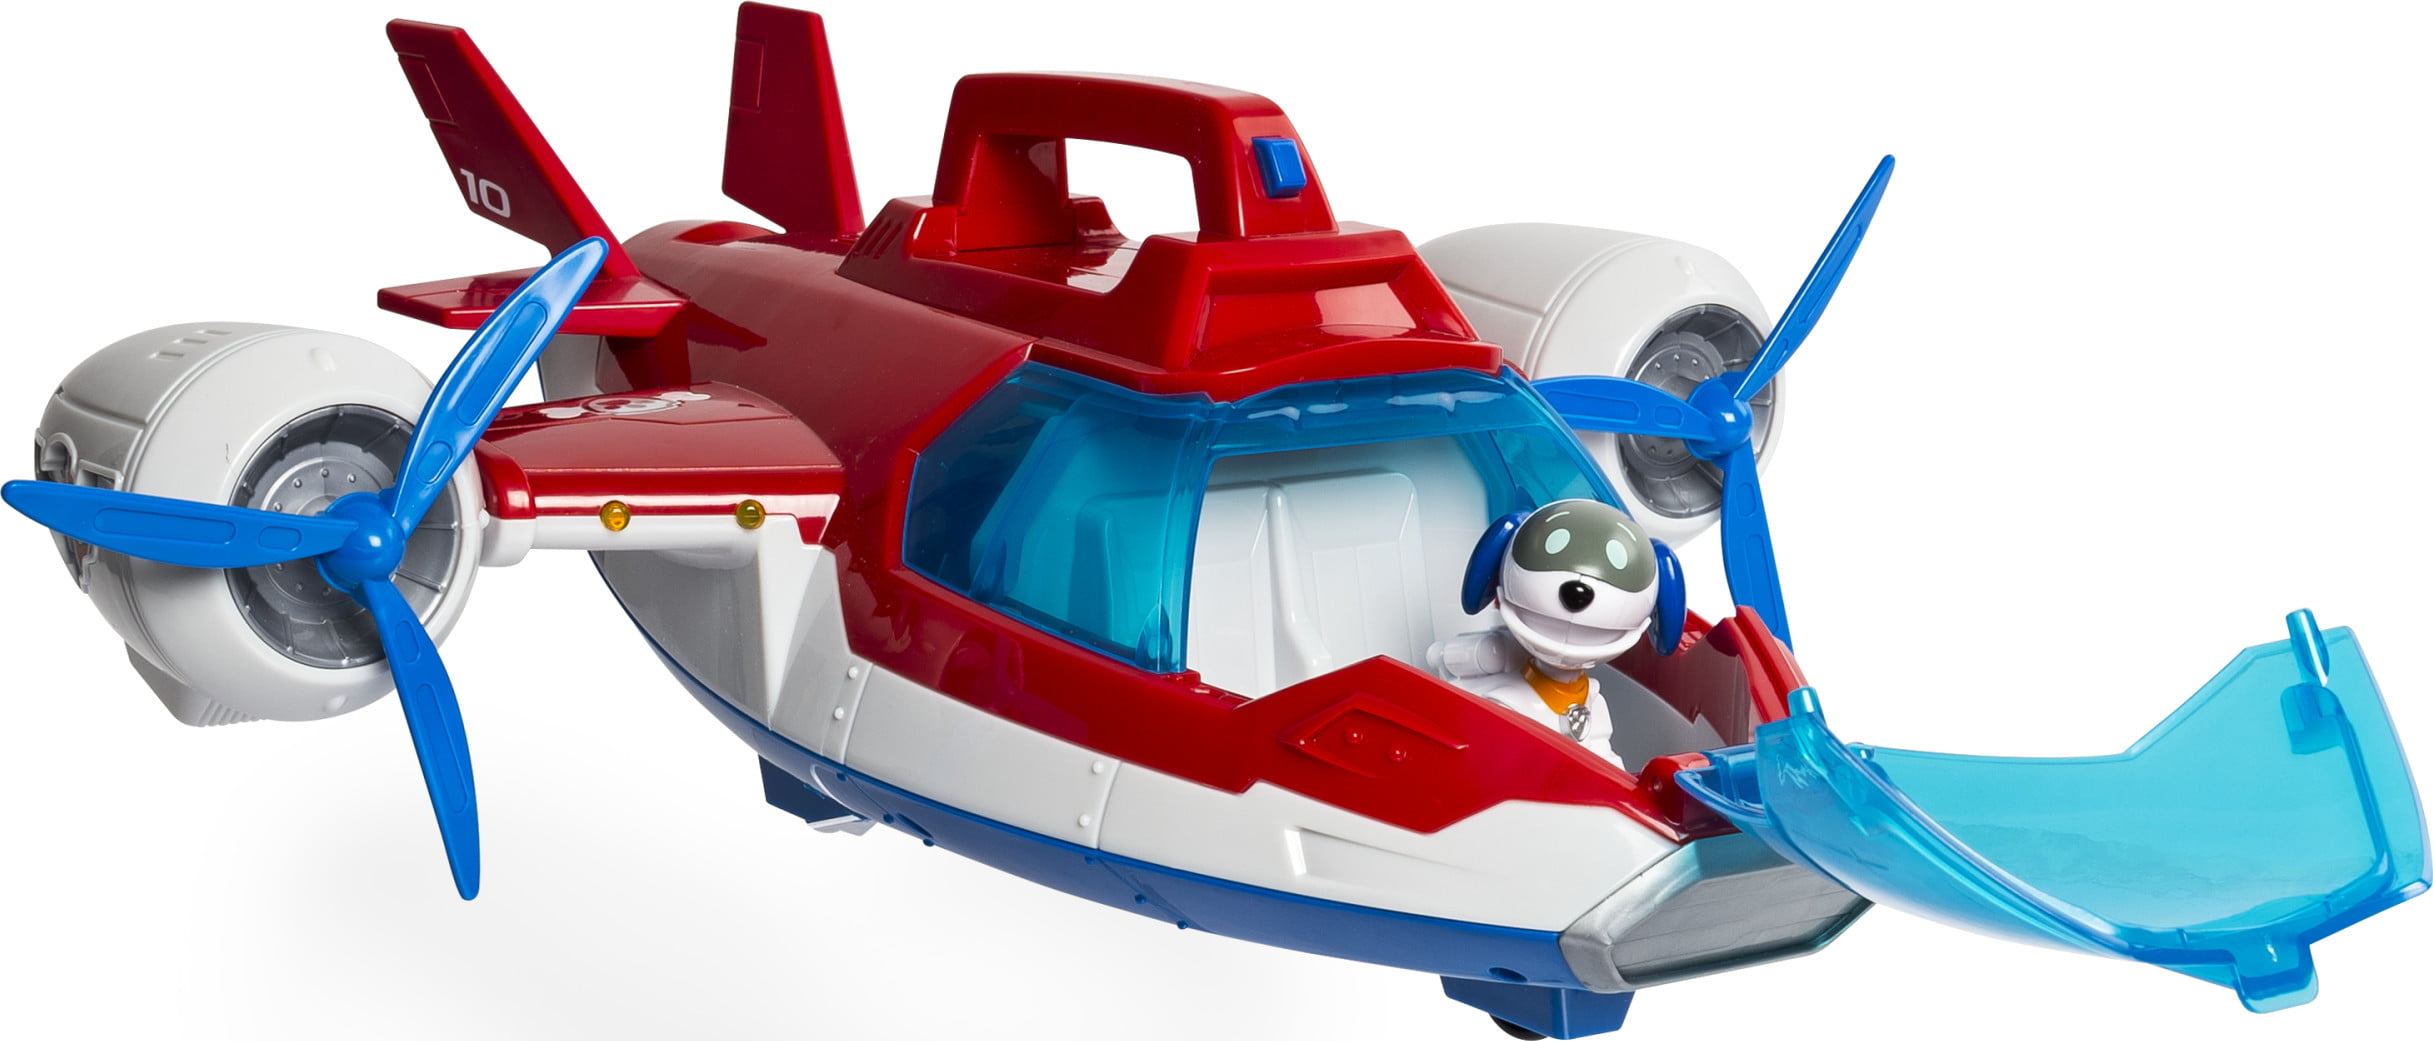 Paw Patrol Air Patroller Plane Playset Lights Sounds Robopup Vehicle Helicopter for sale online 